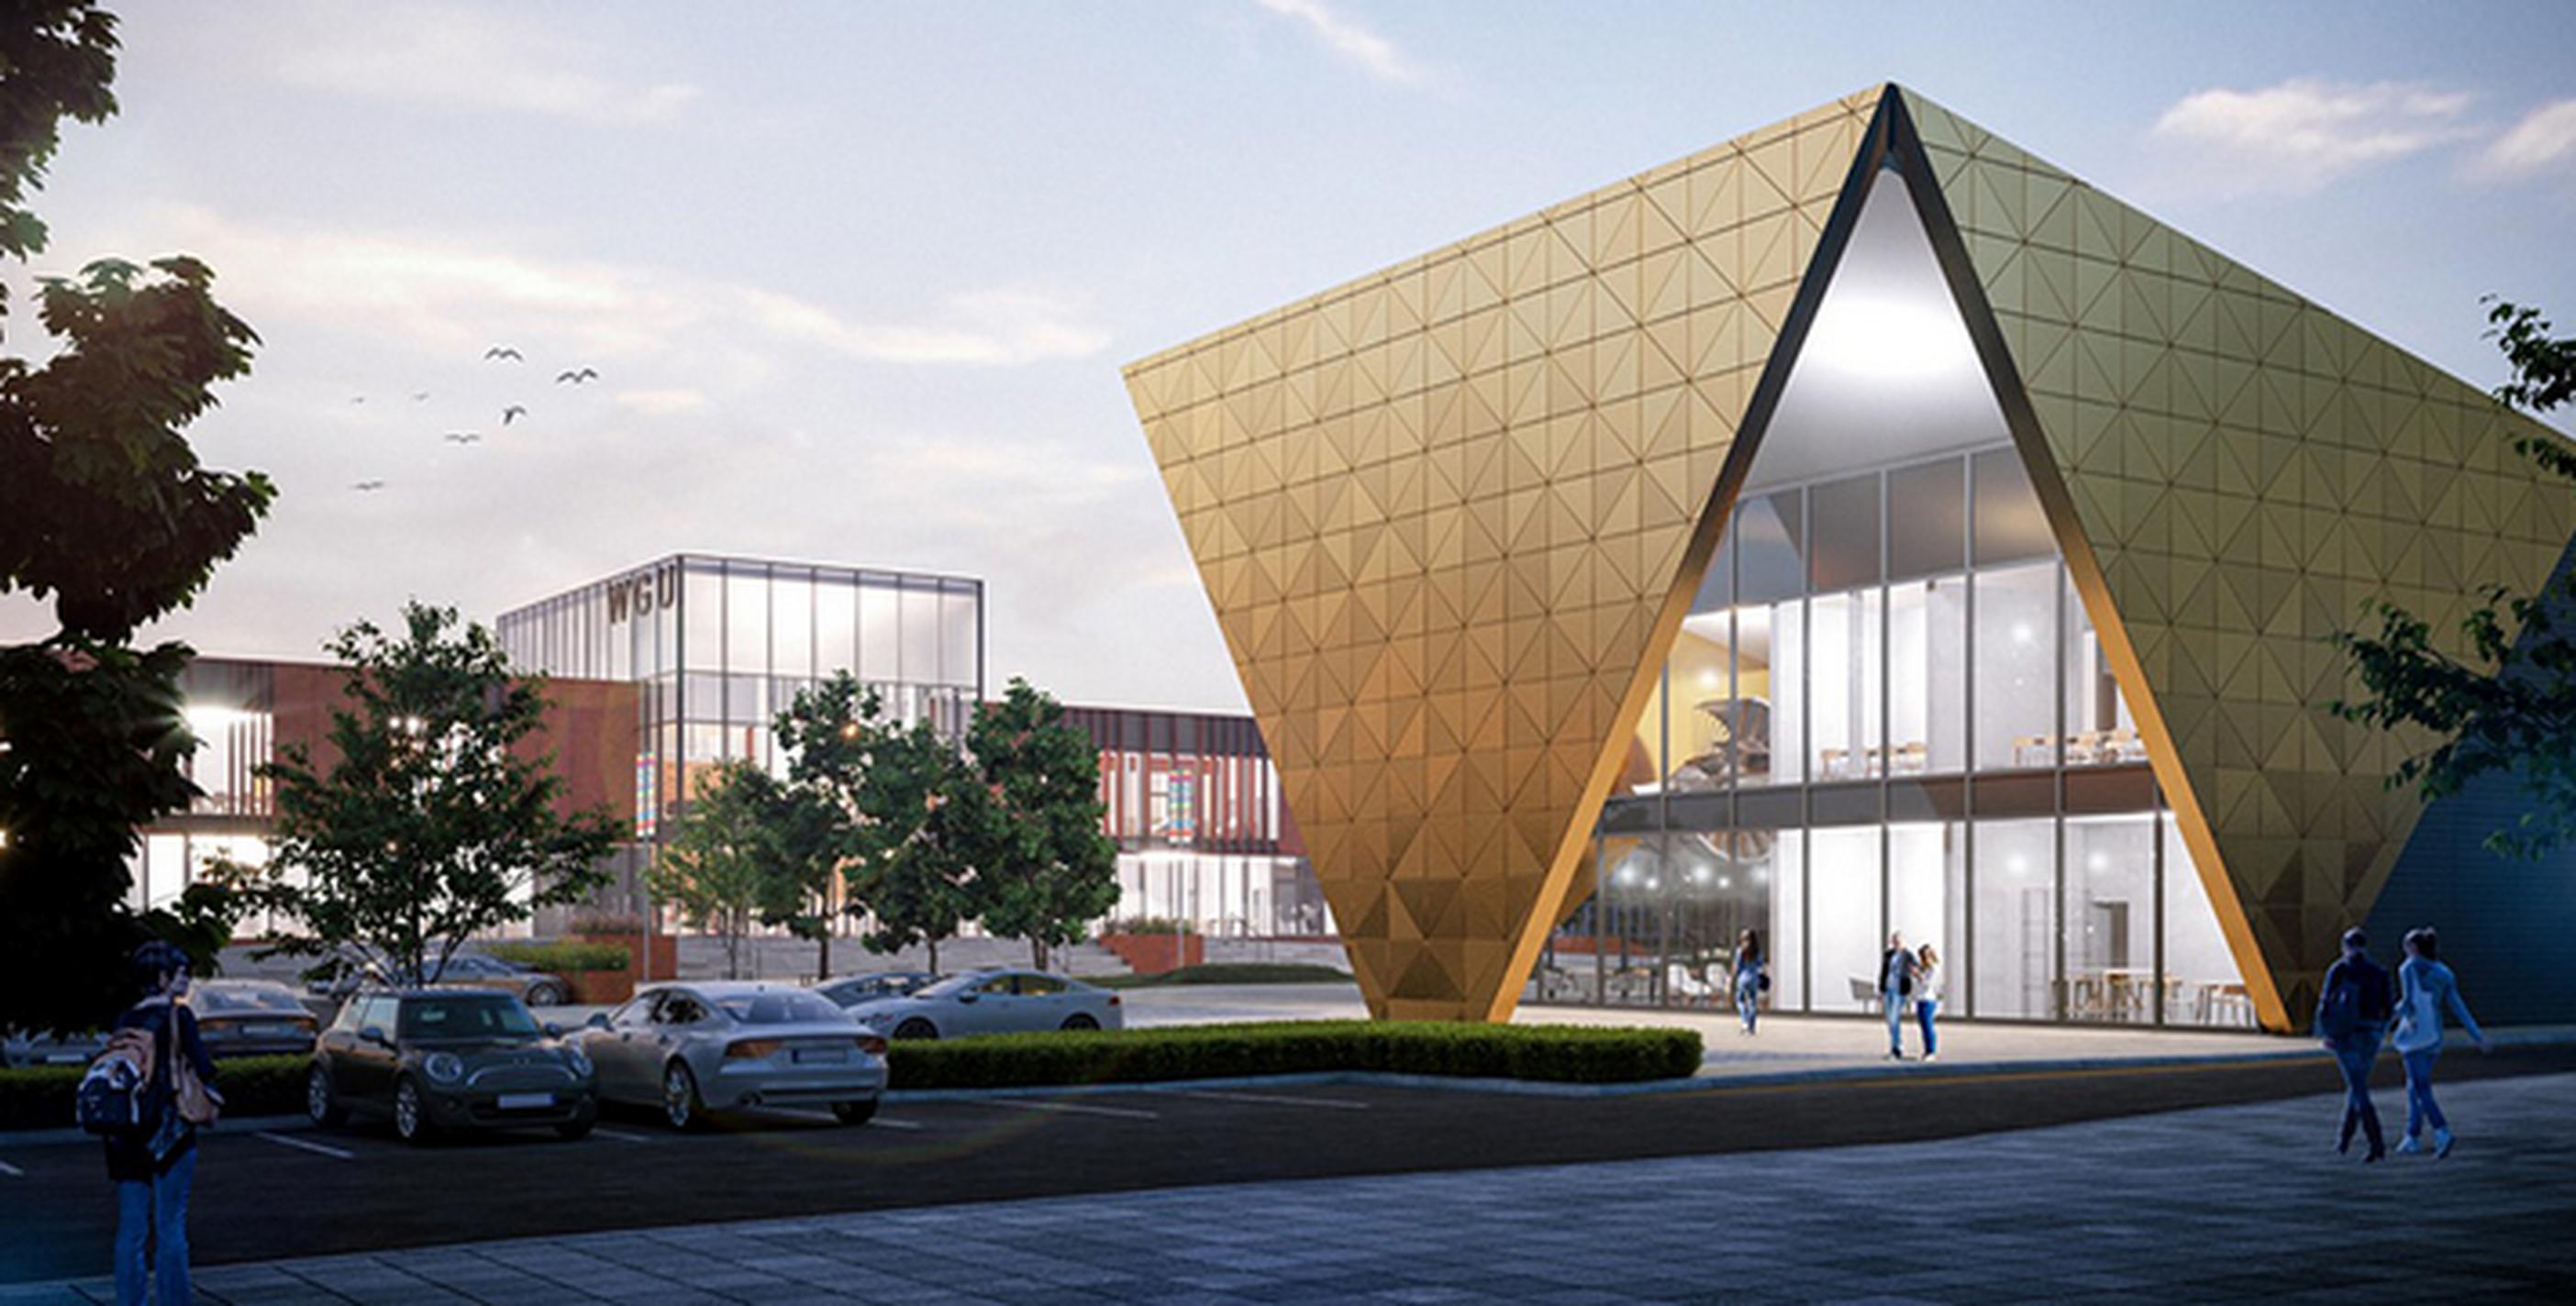 Wrexham Glyndwr University`s vision for its new campus